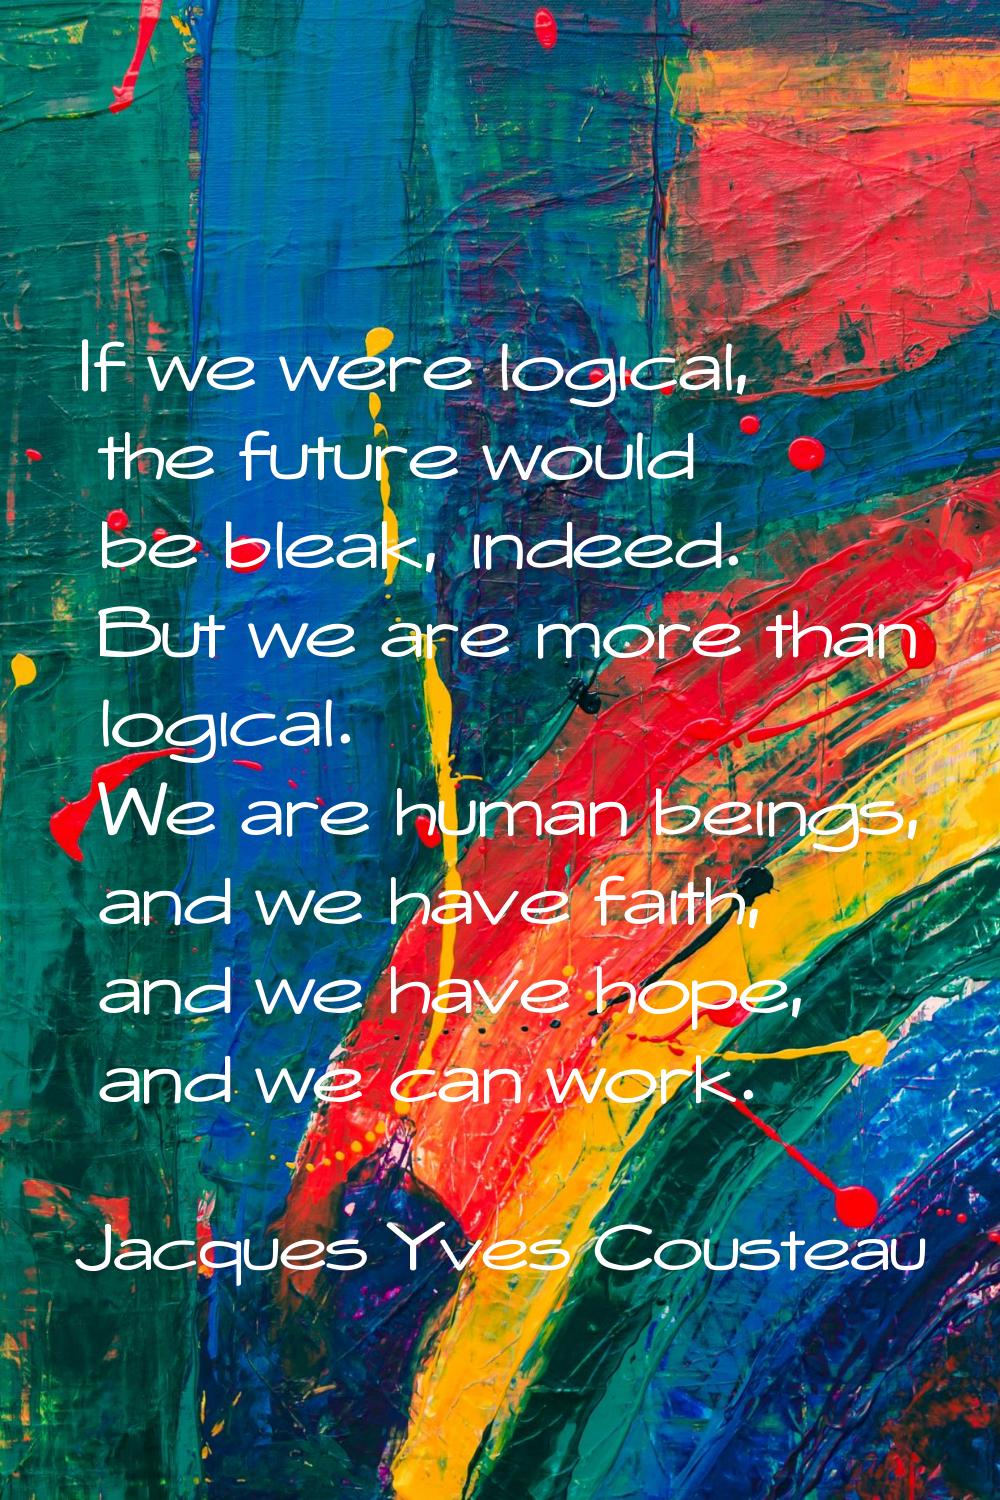 If we were logical, the future would be bleak, indeed. But we are more than logical. We are human b